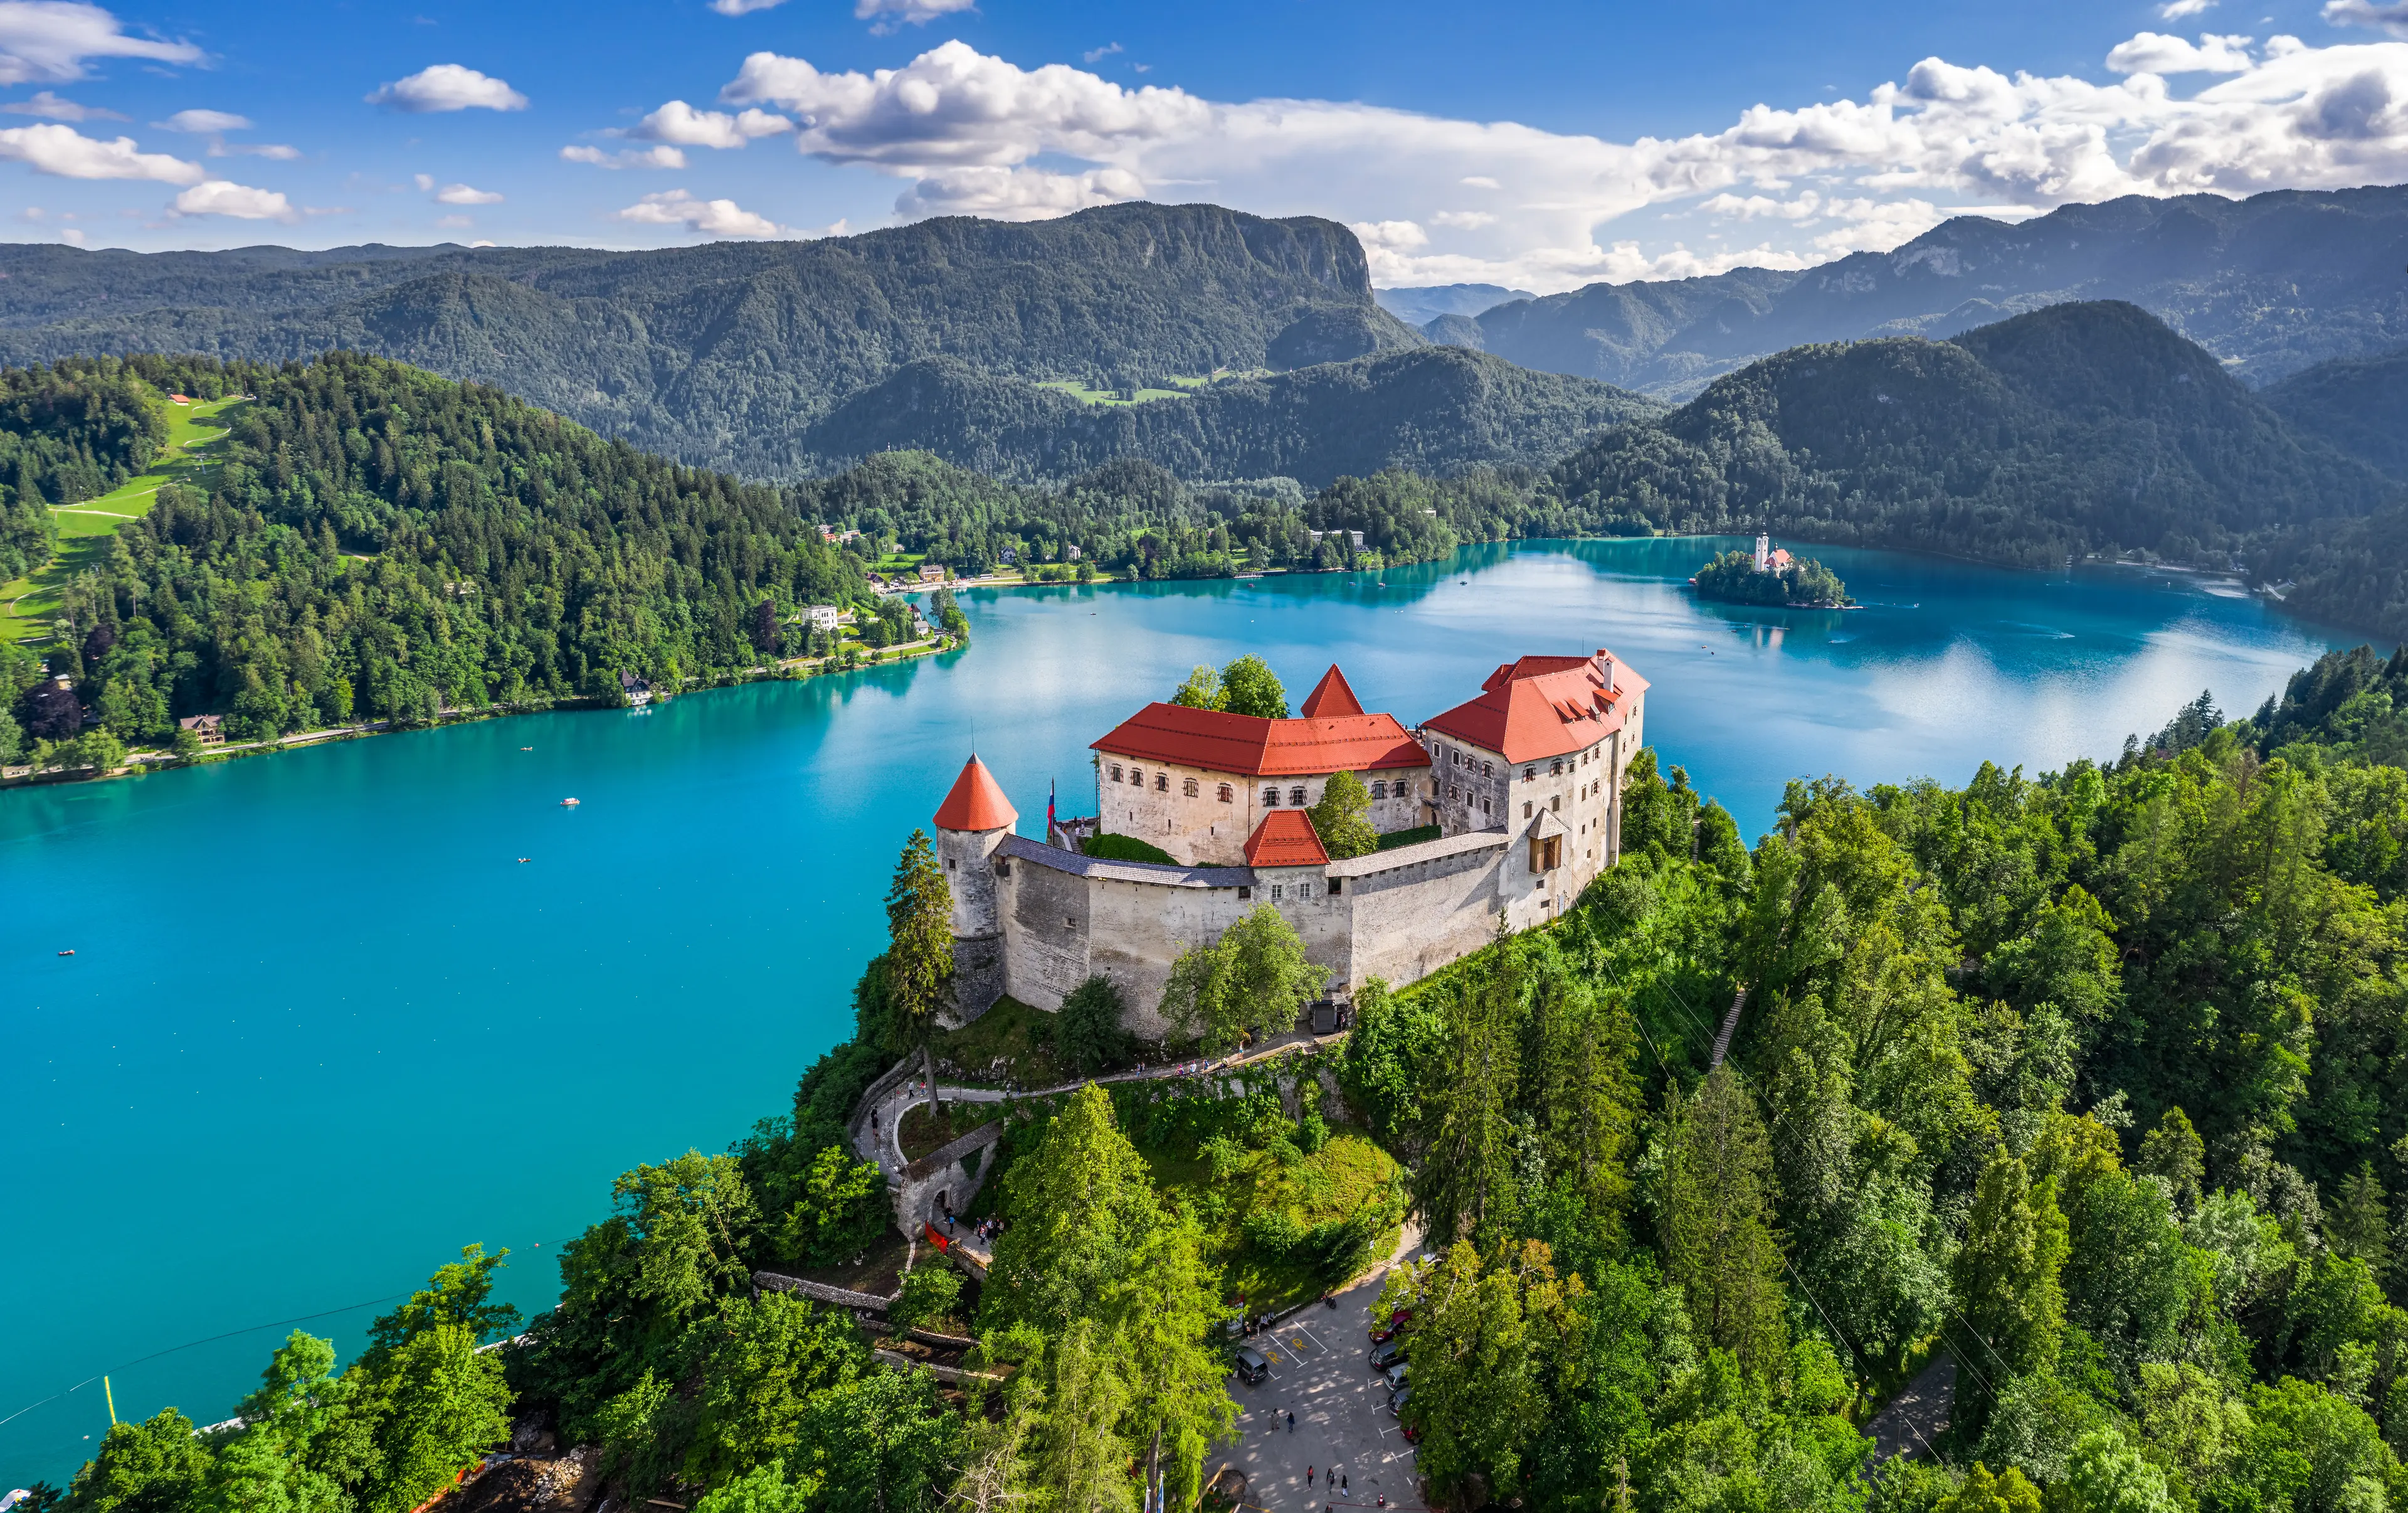 Bled Castle (Blejski Grad) with Lake Bled (Blejsko Jezero), the Church of the Assumption of Maria and Julian Alps at background